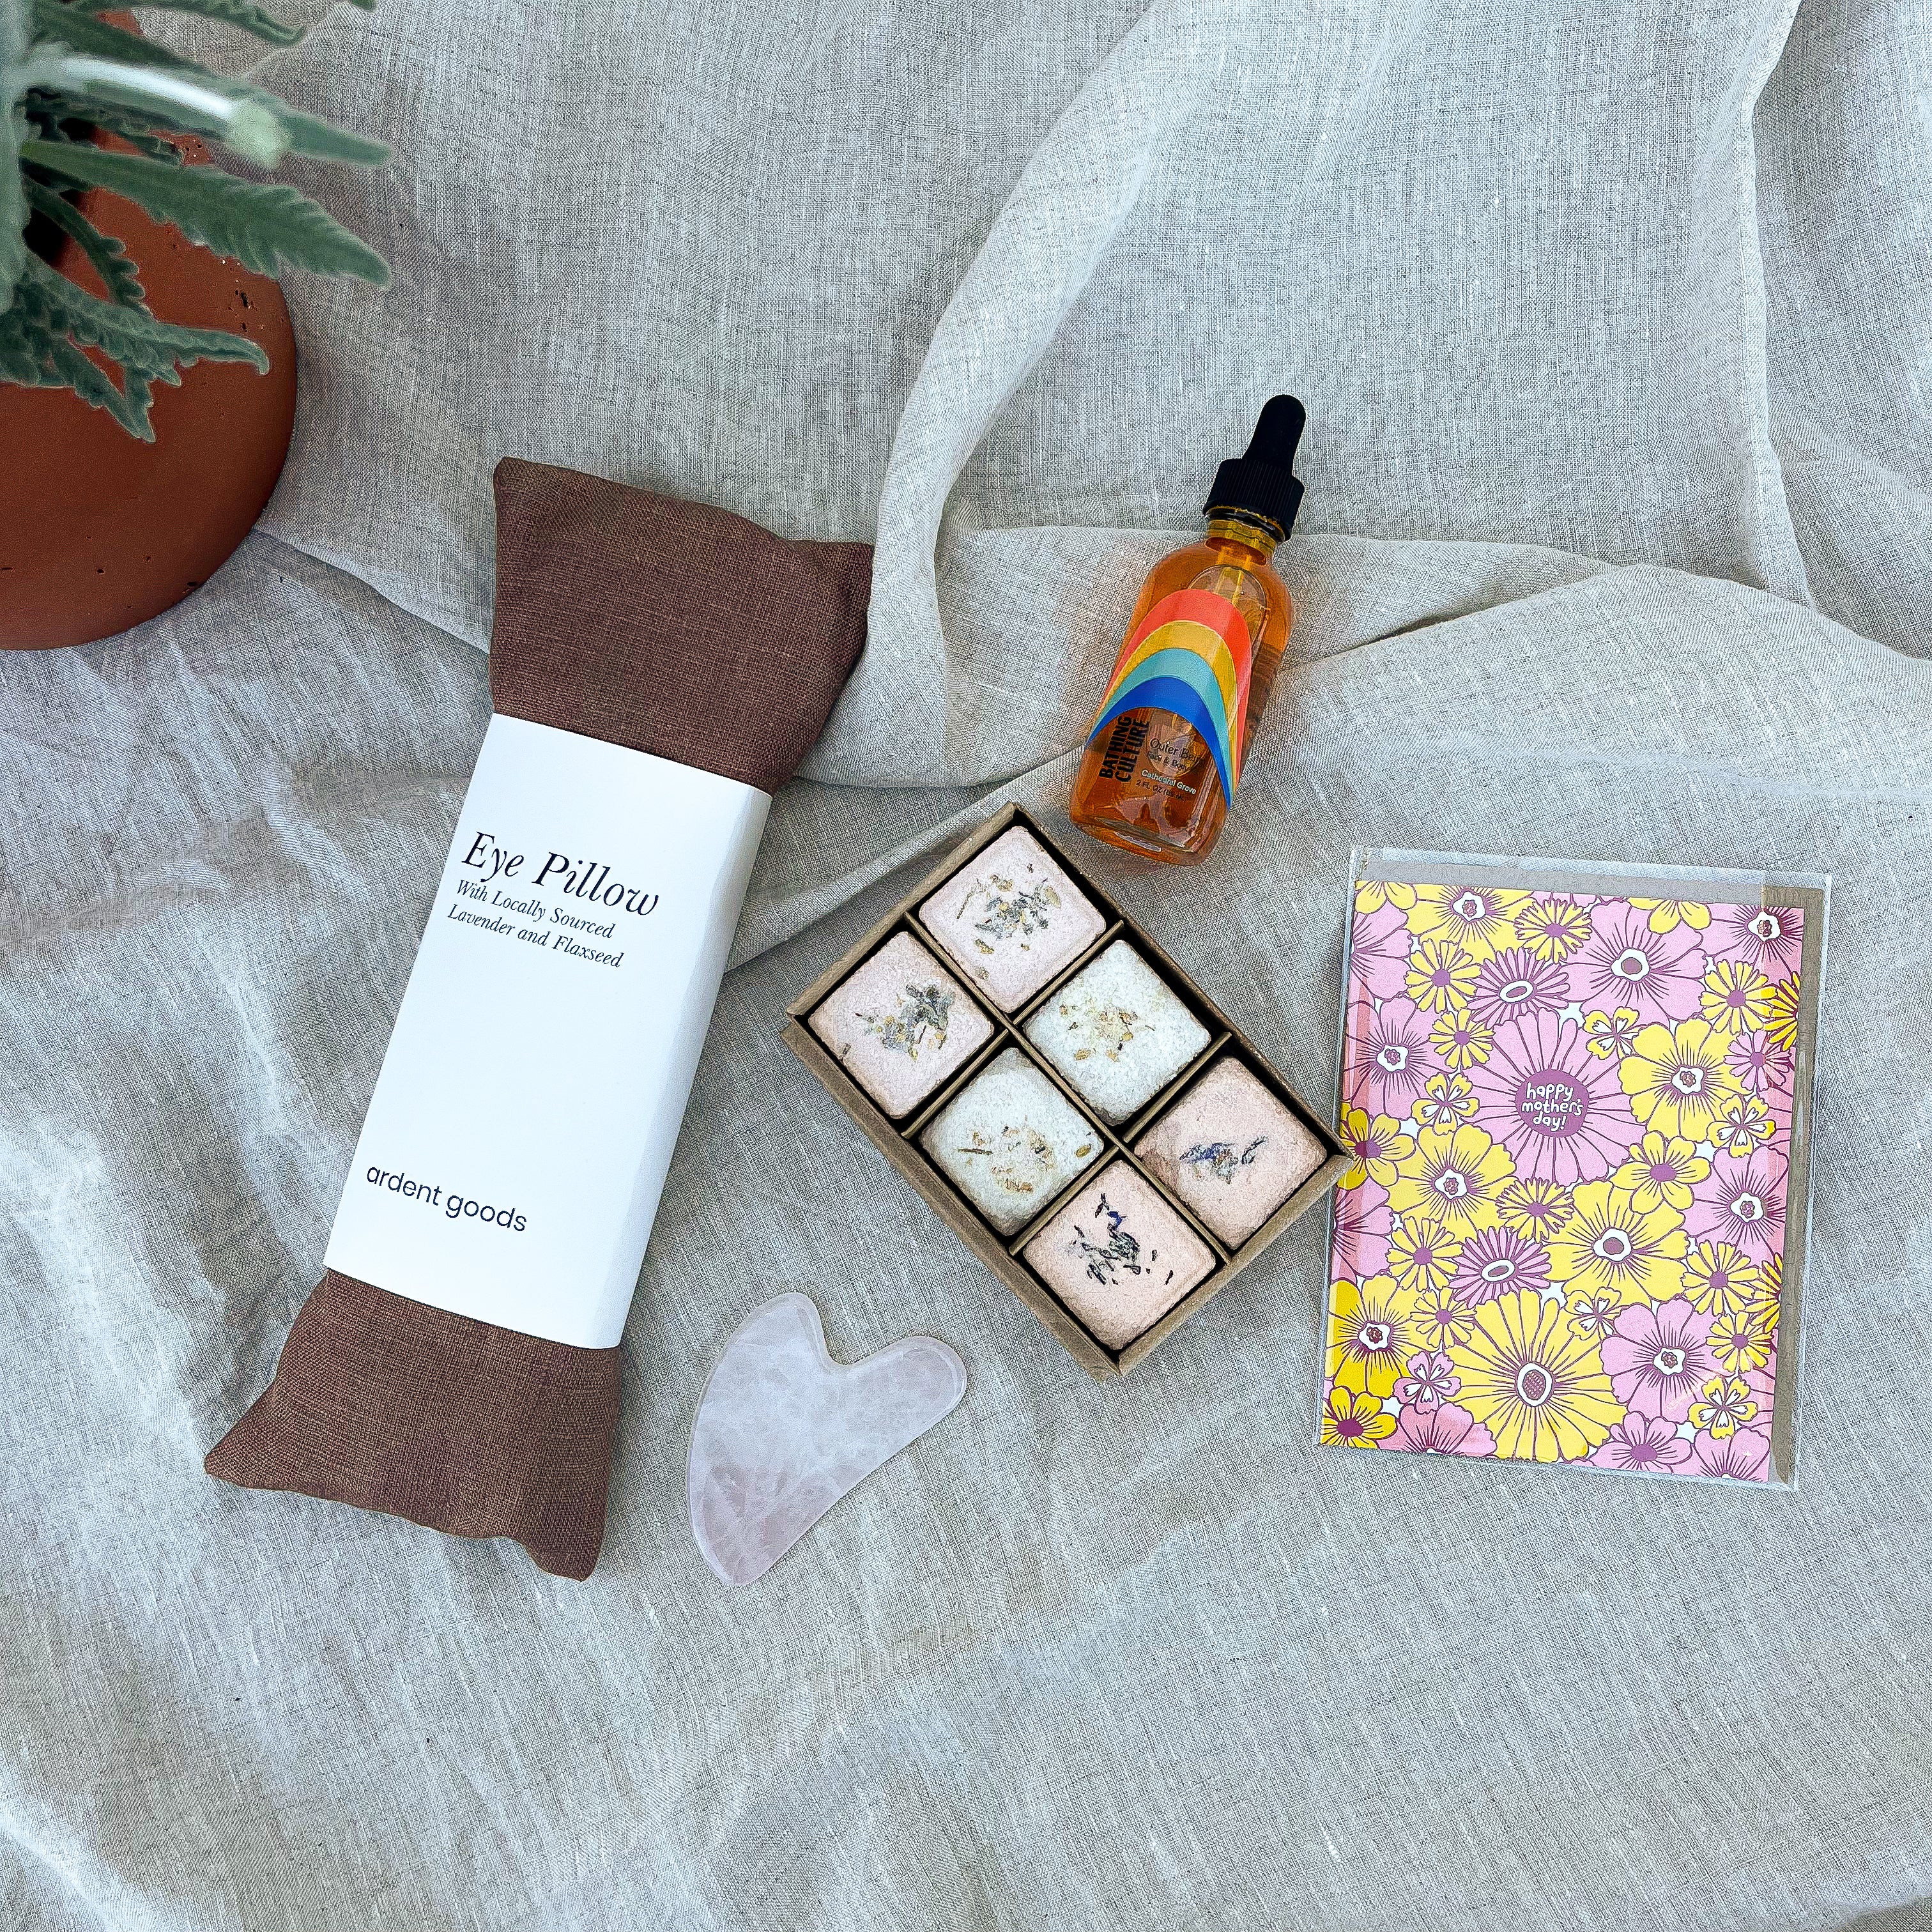 Self Care Clean Beauty Gifts for Mother's Day | Thread Spun Blog